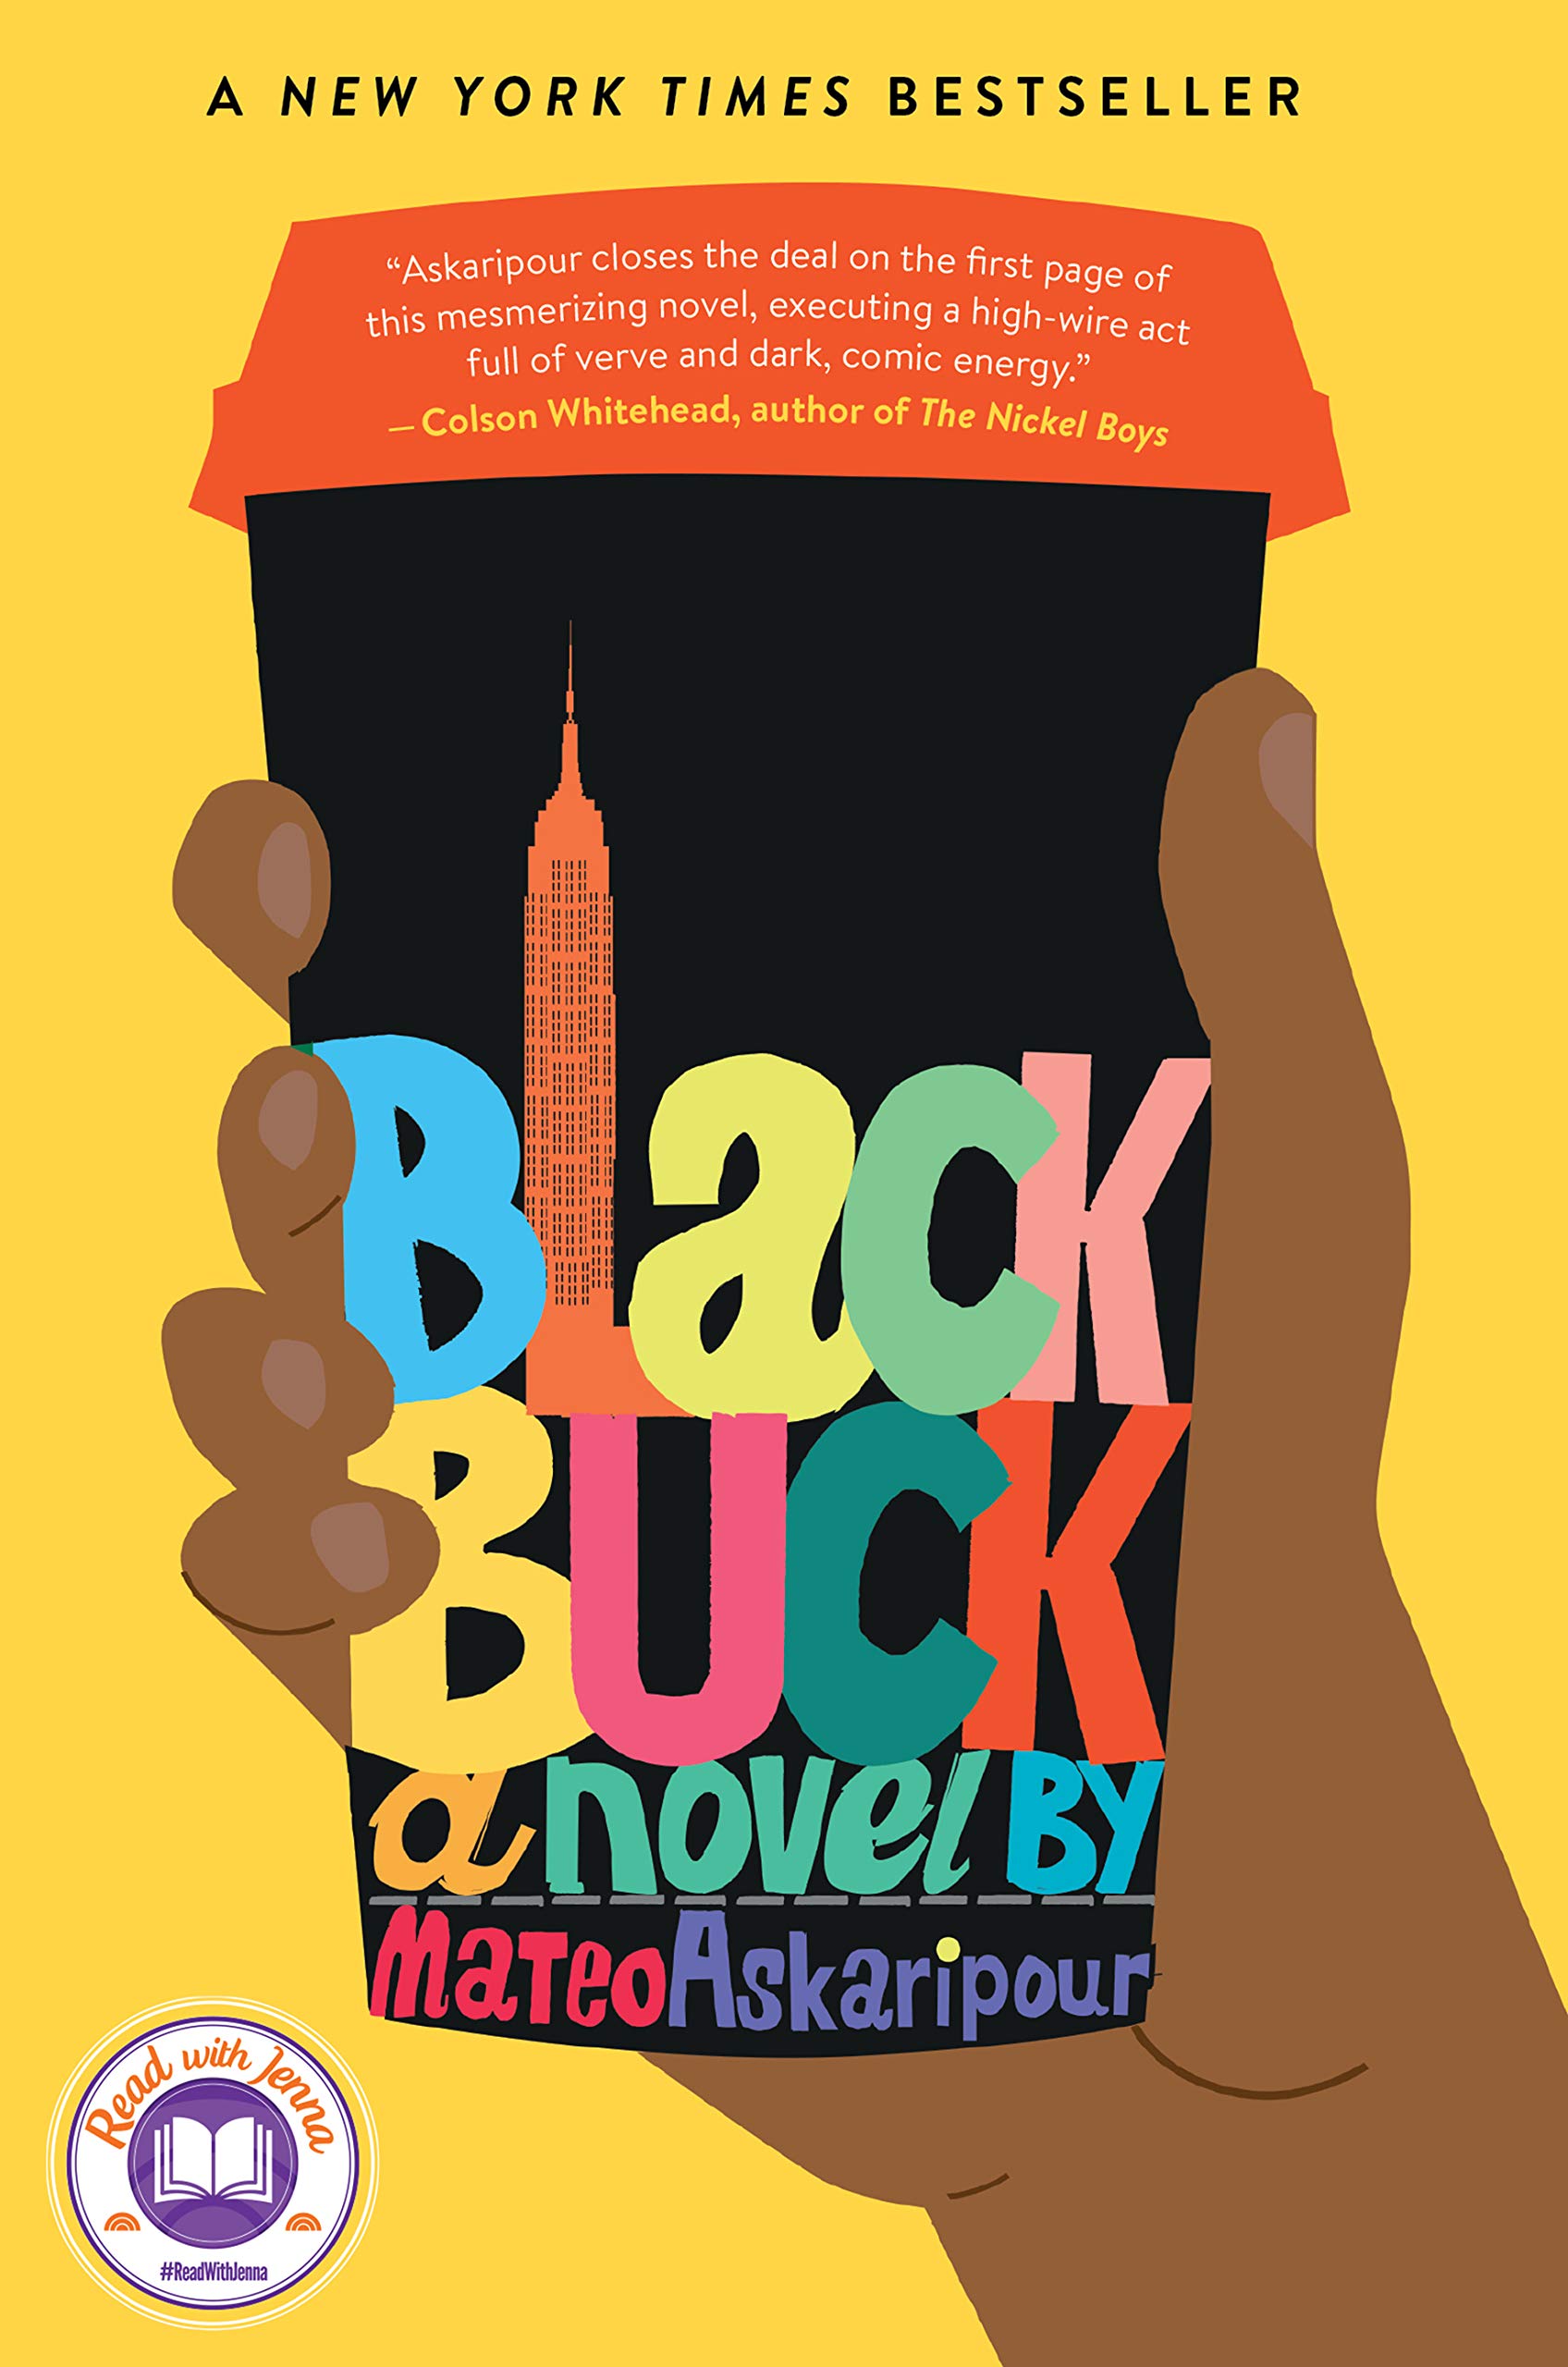 Book cover of Black Buck, by Mateo Askaripour